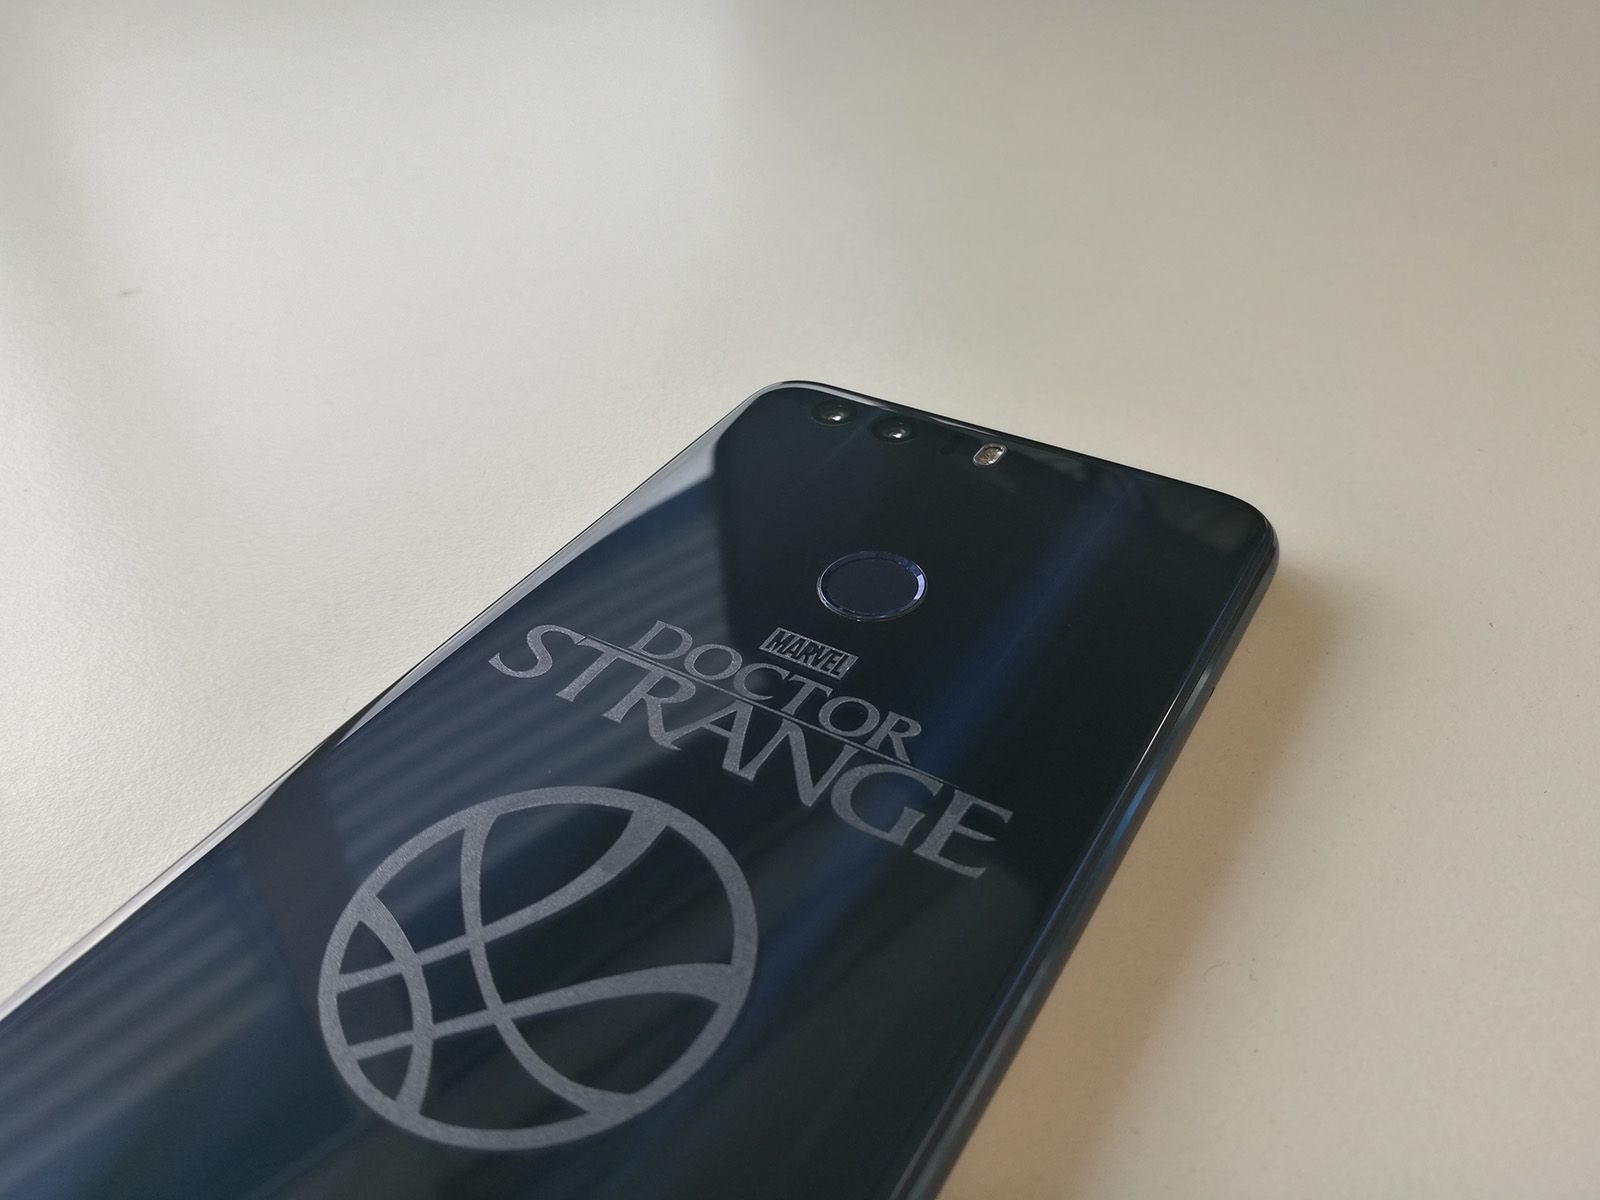 limited edition doctor strange honor 8 phone will be up for grabs soon image 2